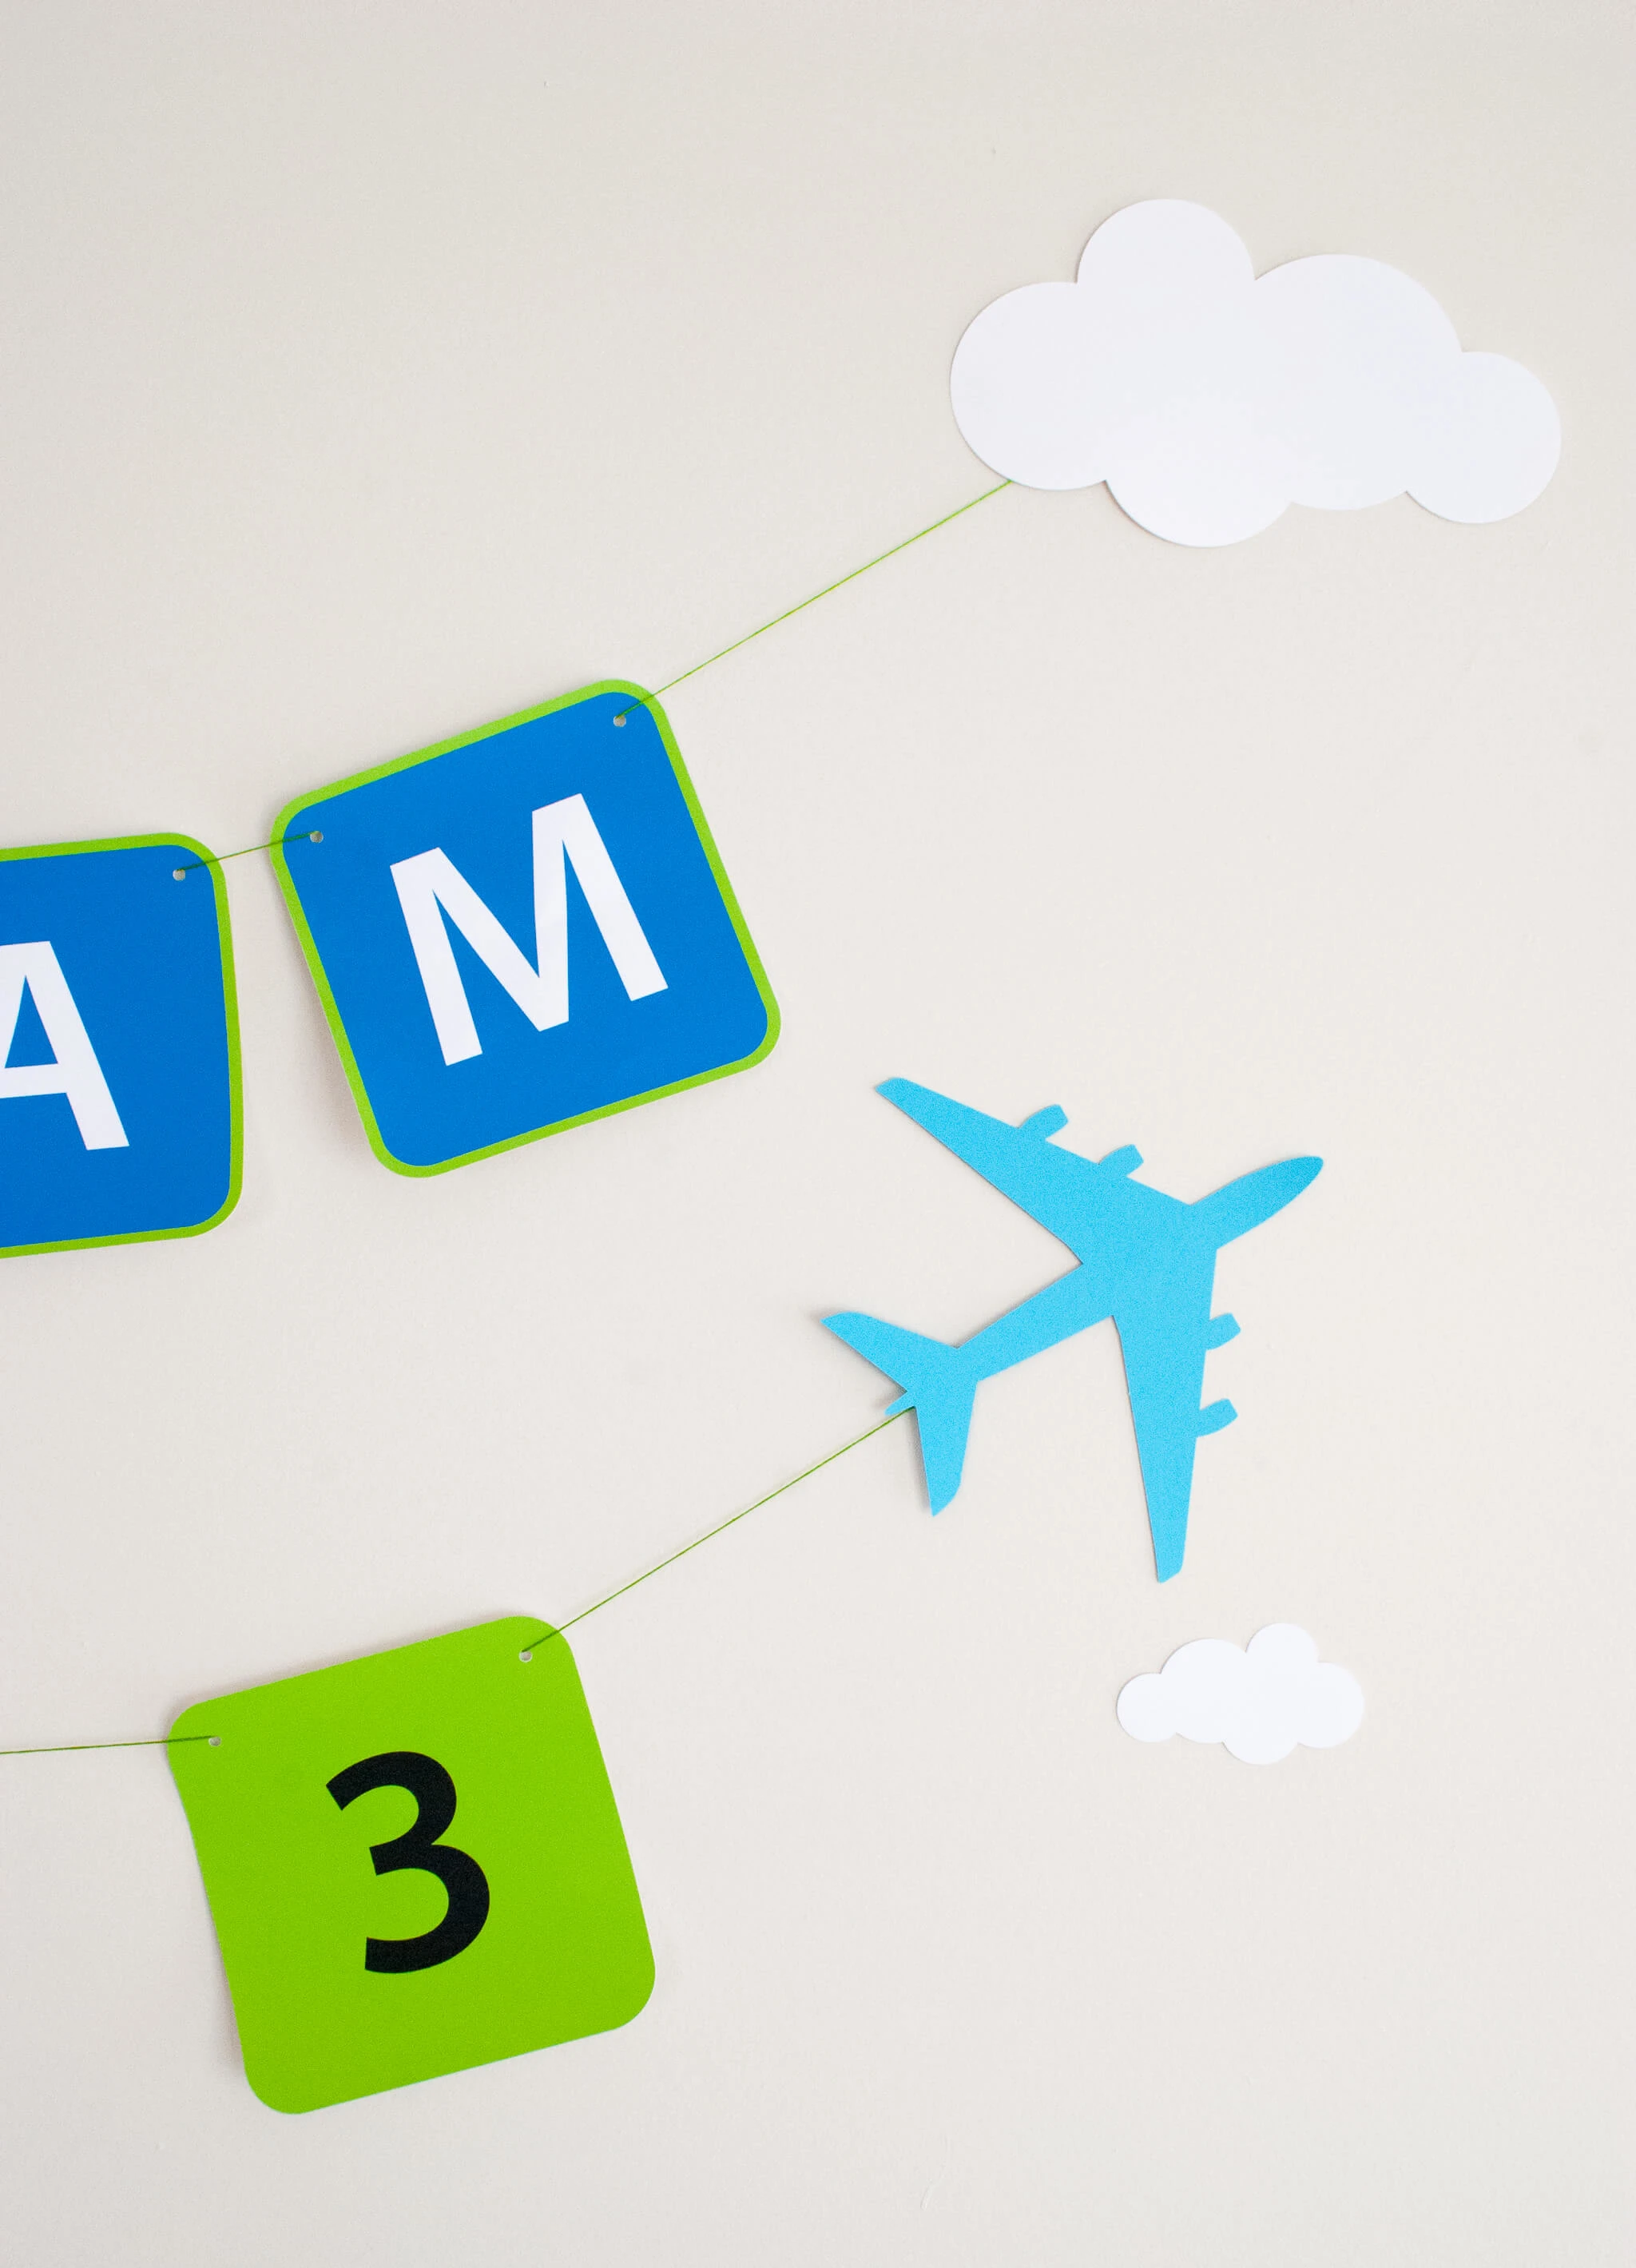 Printable Airplanes Birthday Banner with airplanes (any color) and clouds. Just download, type to personalize as many letters as you wish ("Happy 3rd Birthday Liam" or "Liam is 3" etc.), cut and hang!